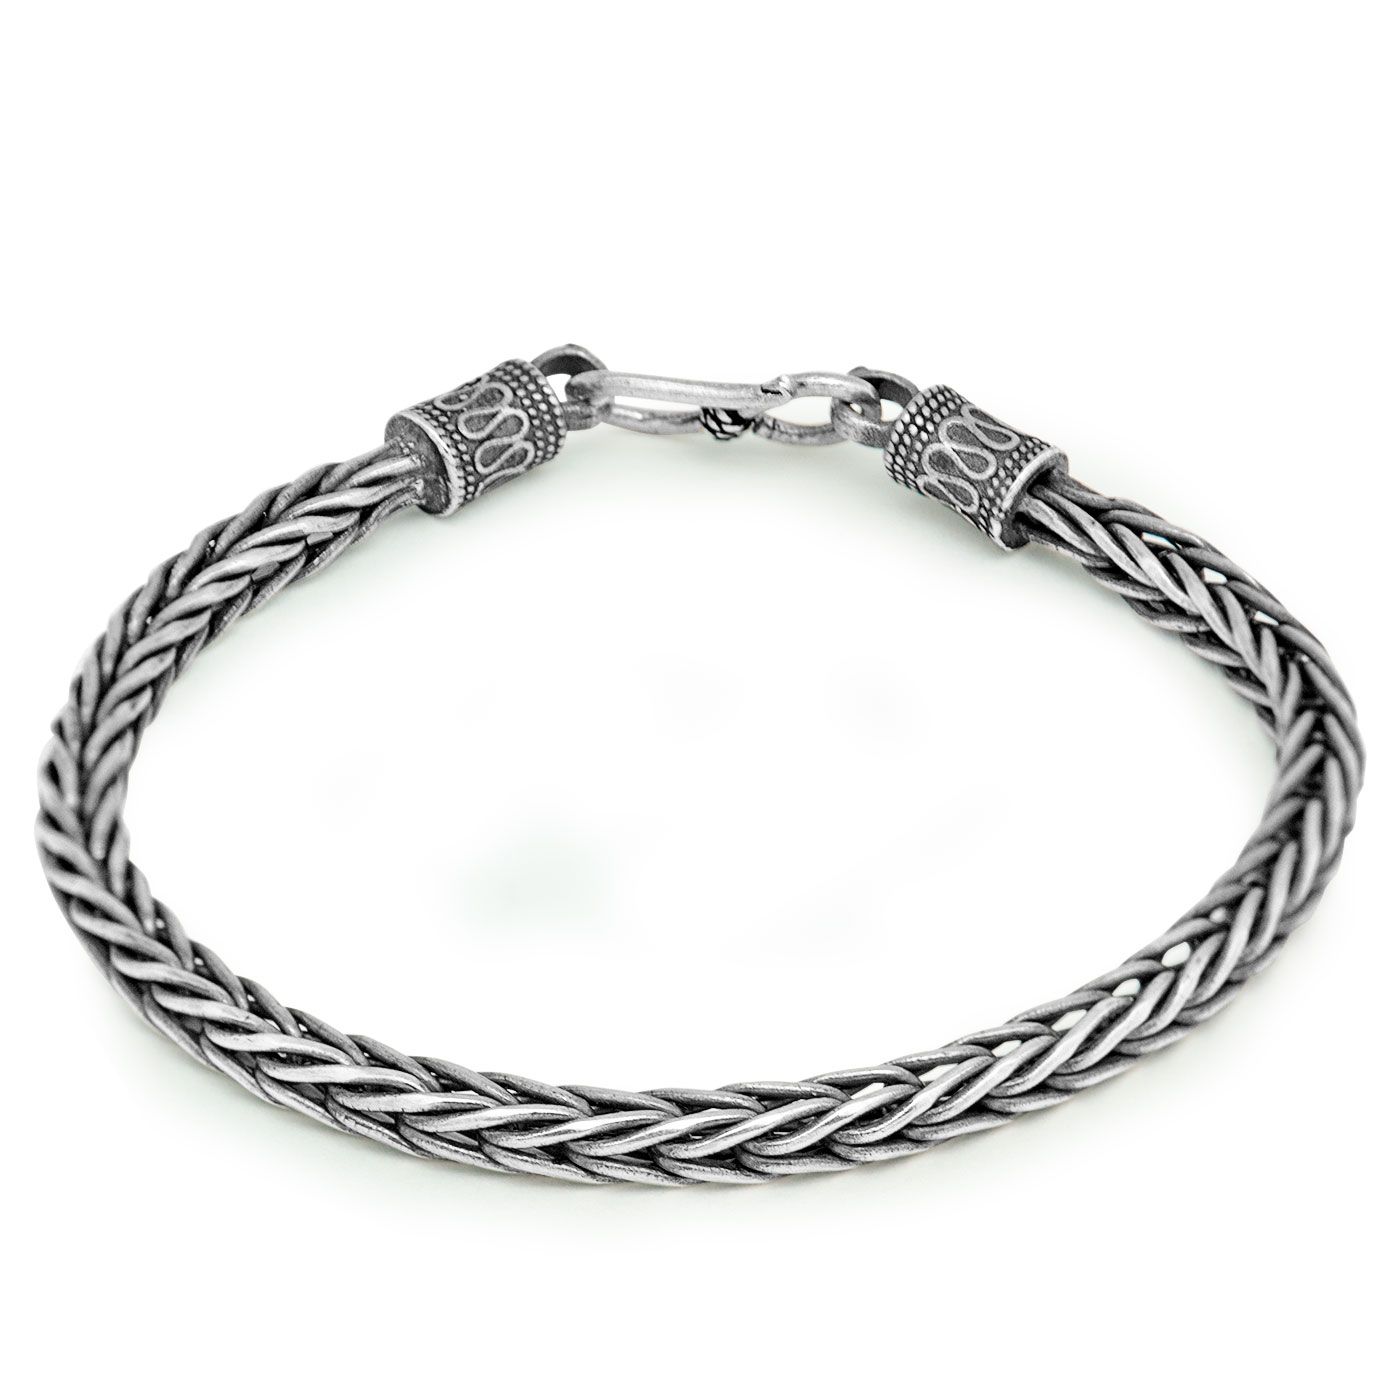 Men's Jewelry 925Sterling Silver Solid Silver 2 Beads Fashion Bangle Bracelet